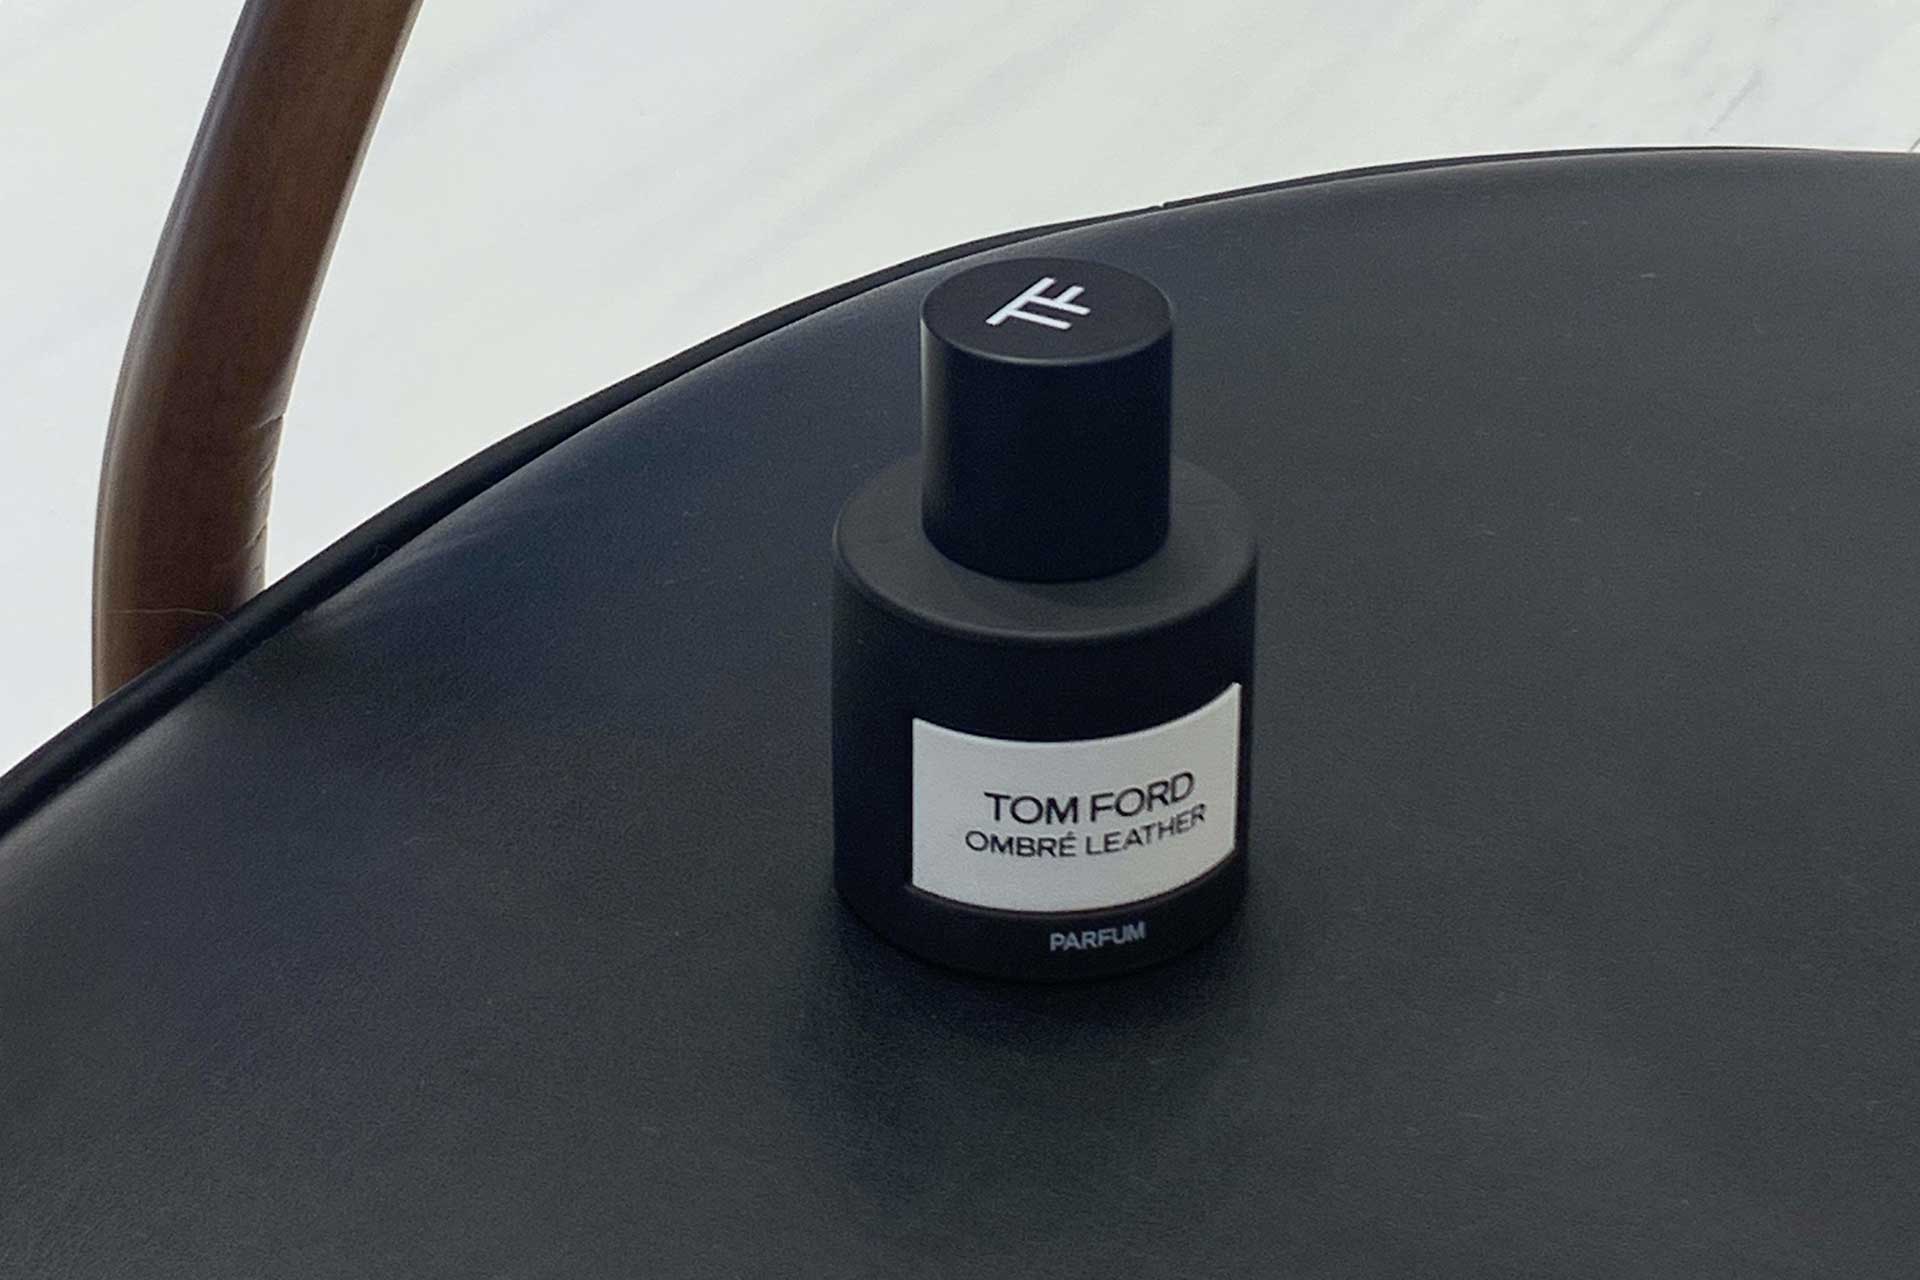 Tom Ford Ombré Leather. Childhood in Texas and commitment